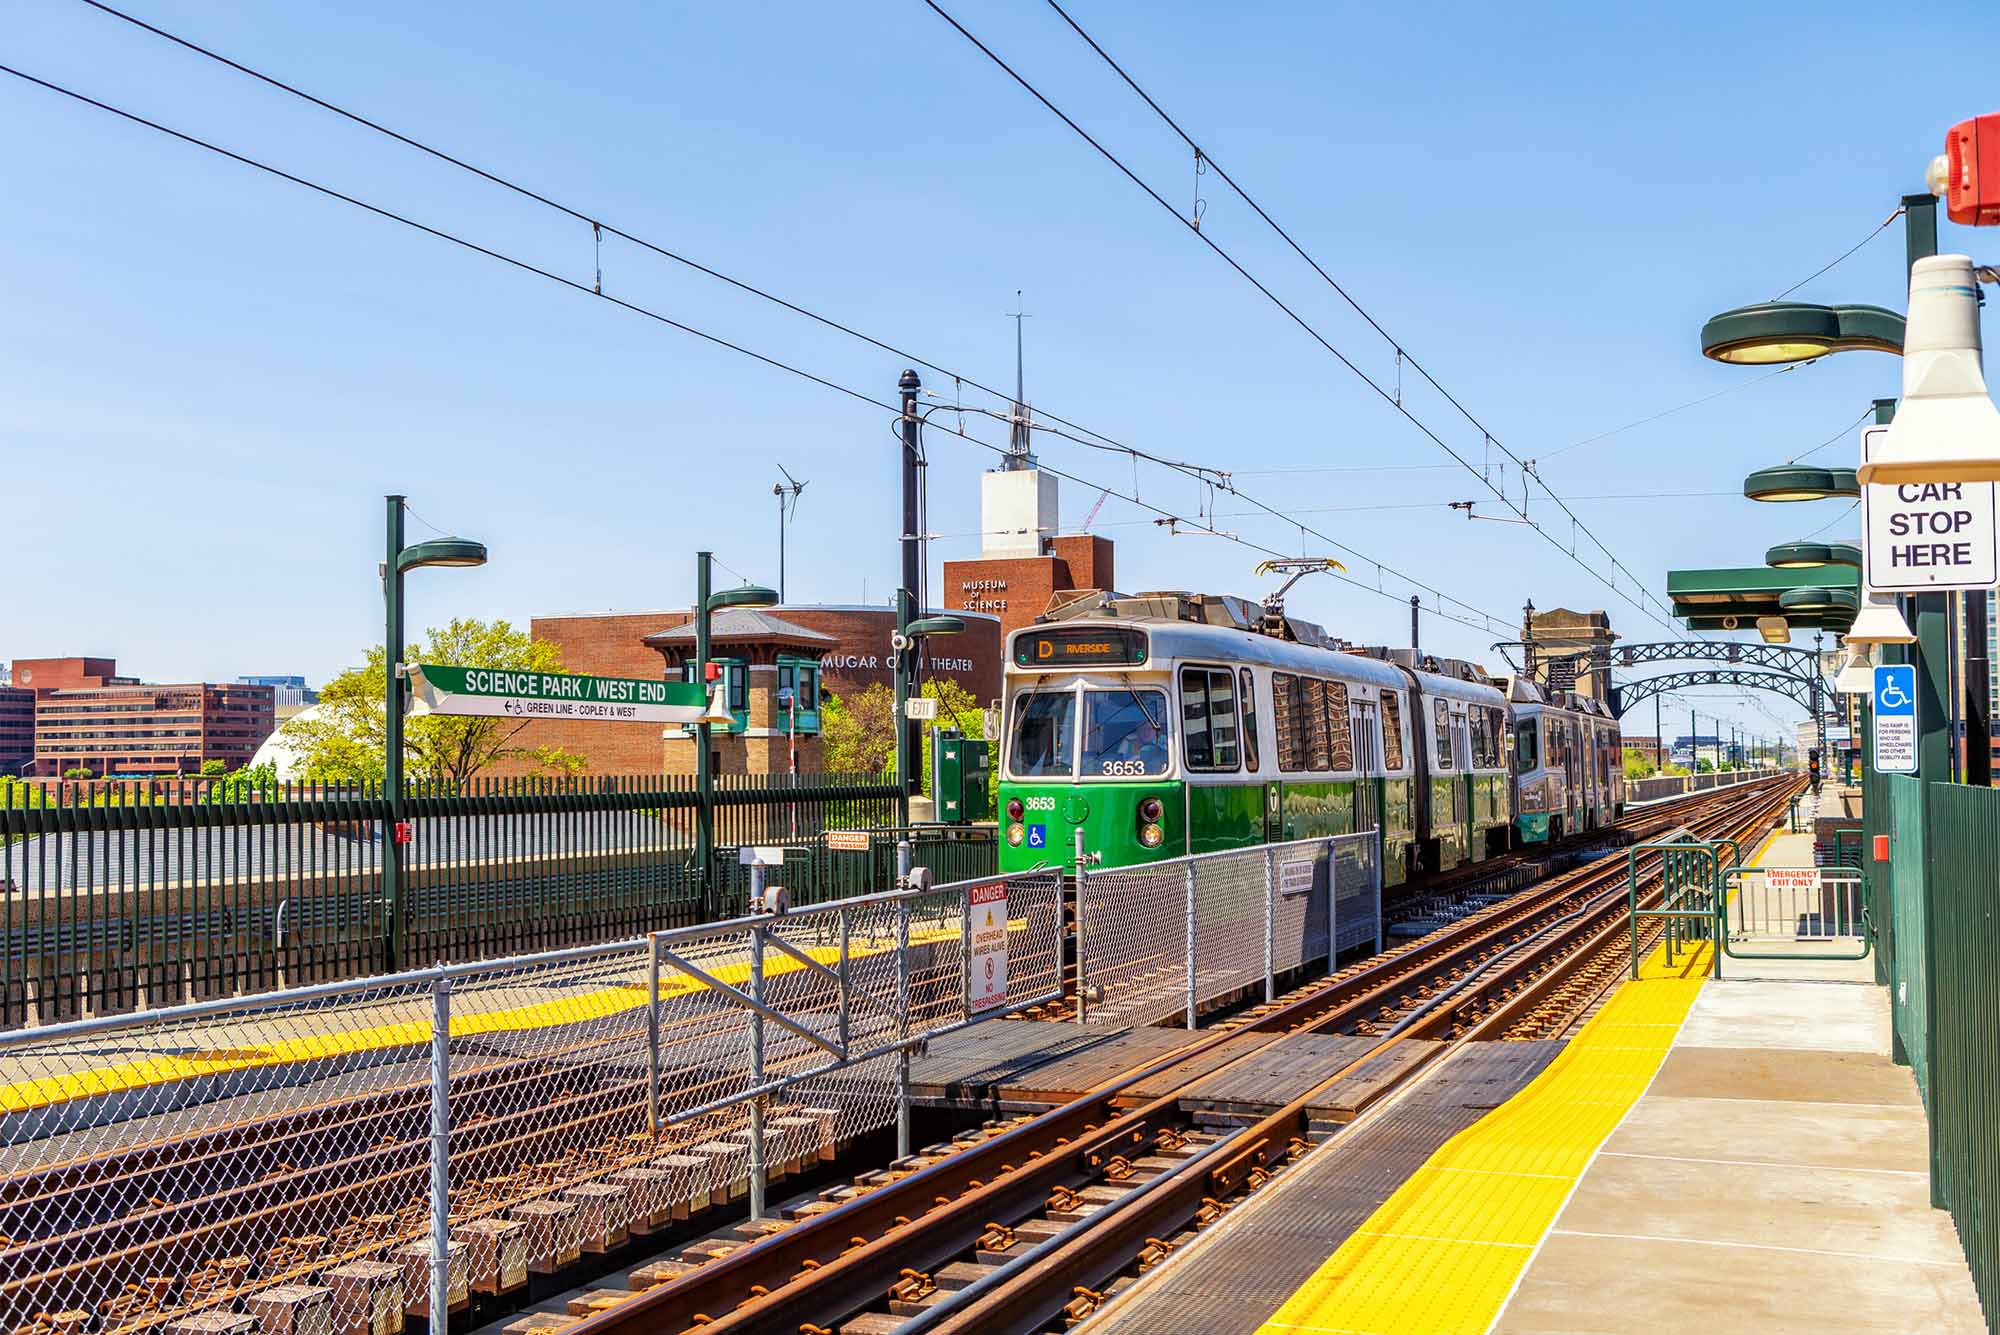 Photo: An MBTA green line train sitting at a station outside in Boston on a sunny day